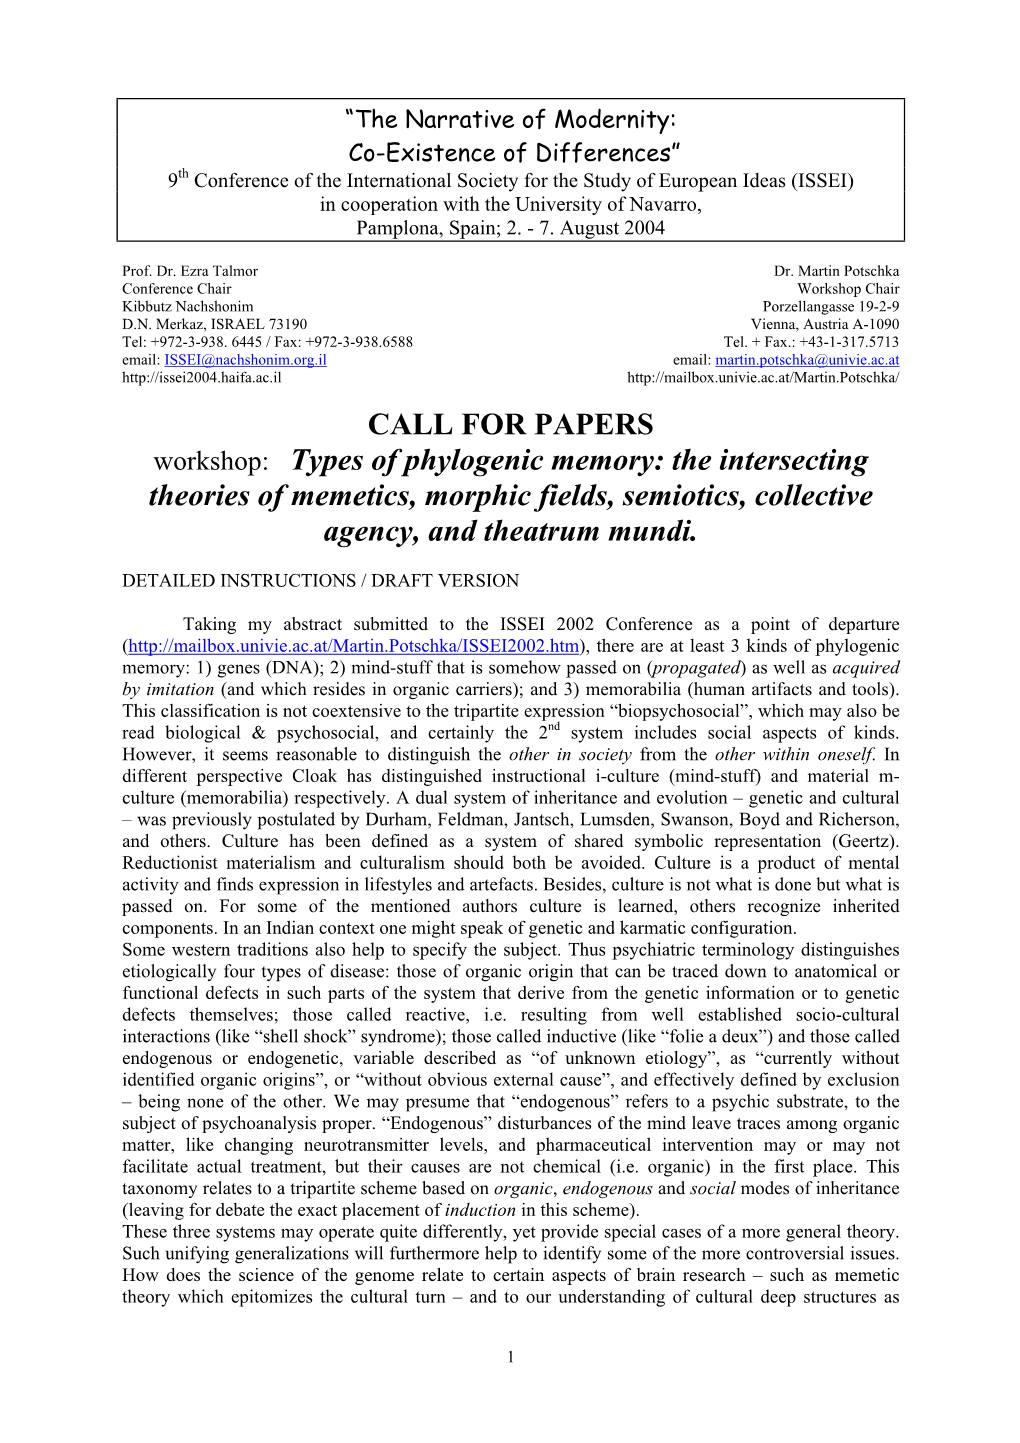 CALL for PAPERS Workshop: Types of Phylogenic Memory: the Intersecting Theories of Memetics, Morphic Fields, Semiotics, Collective Agency, and Theatrum Mundi